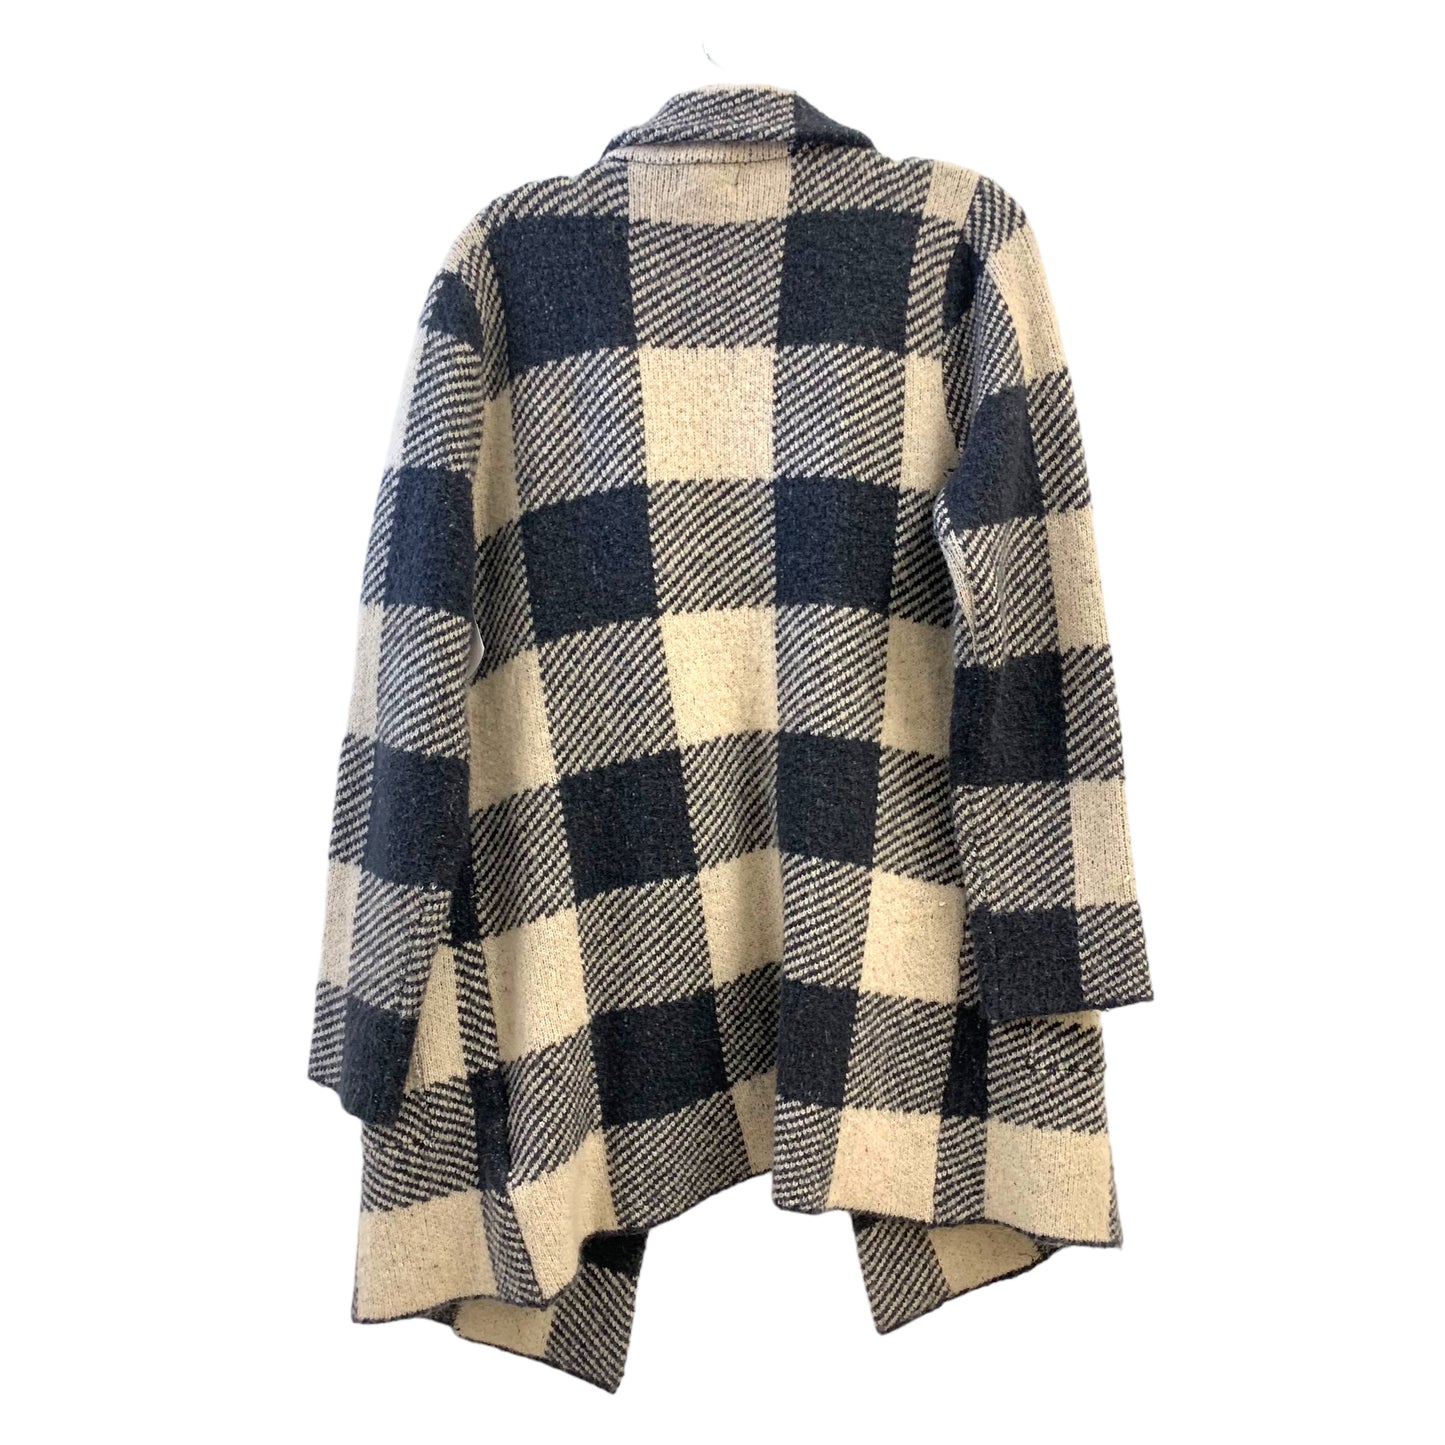 Cardigan By One World  Size: M